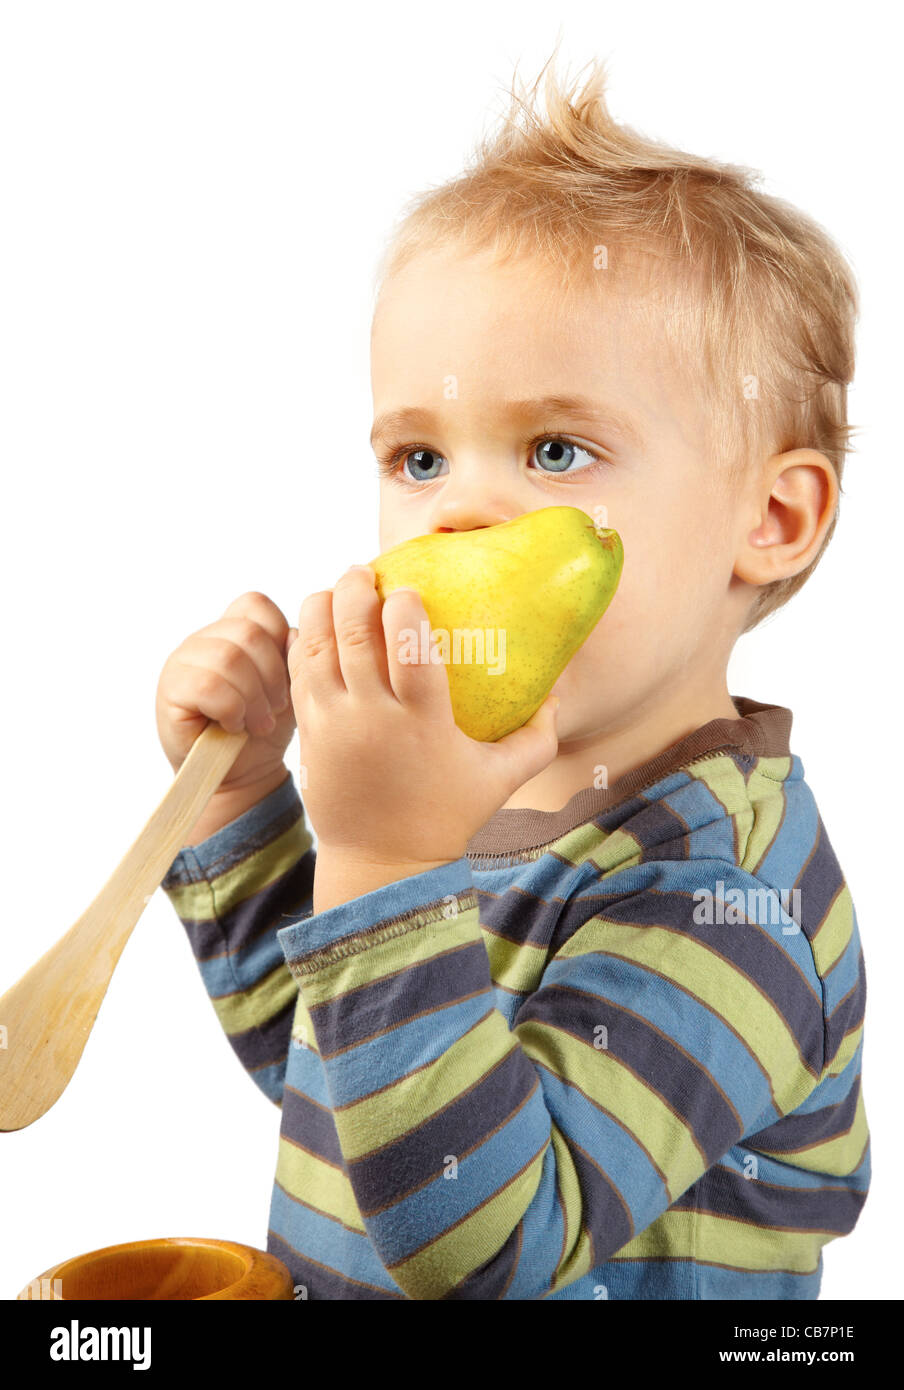 Studio portrait of one year old baby boy eating a ripe pear on white. Stock Photo